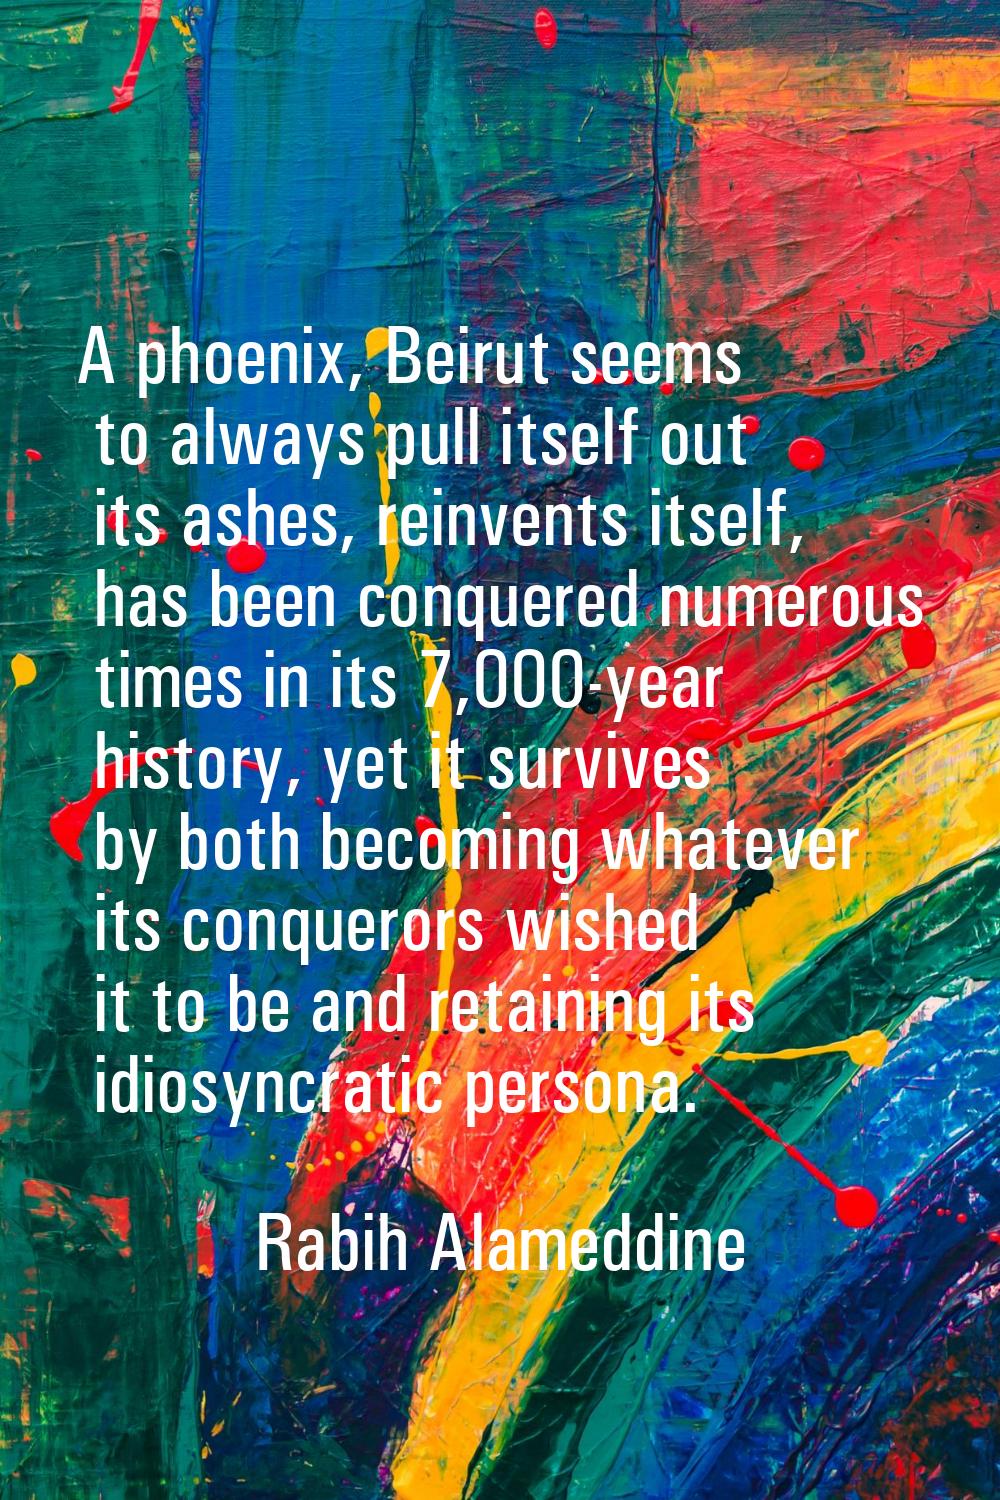 A phoenix, Beirut seems to always pull itself out its ashes, reinvents itself, has been conquered n